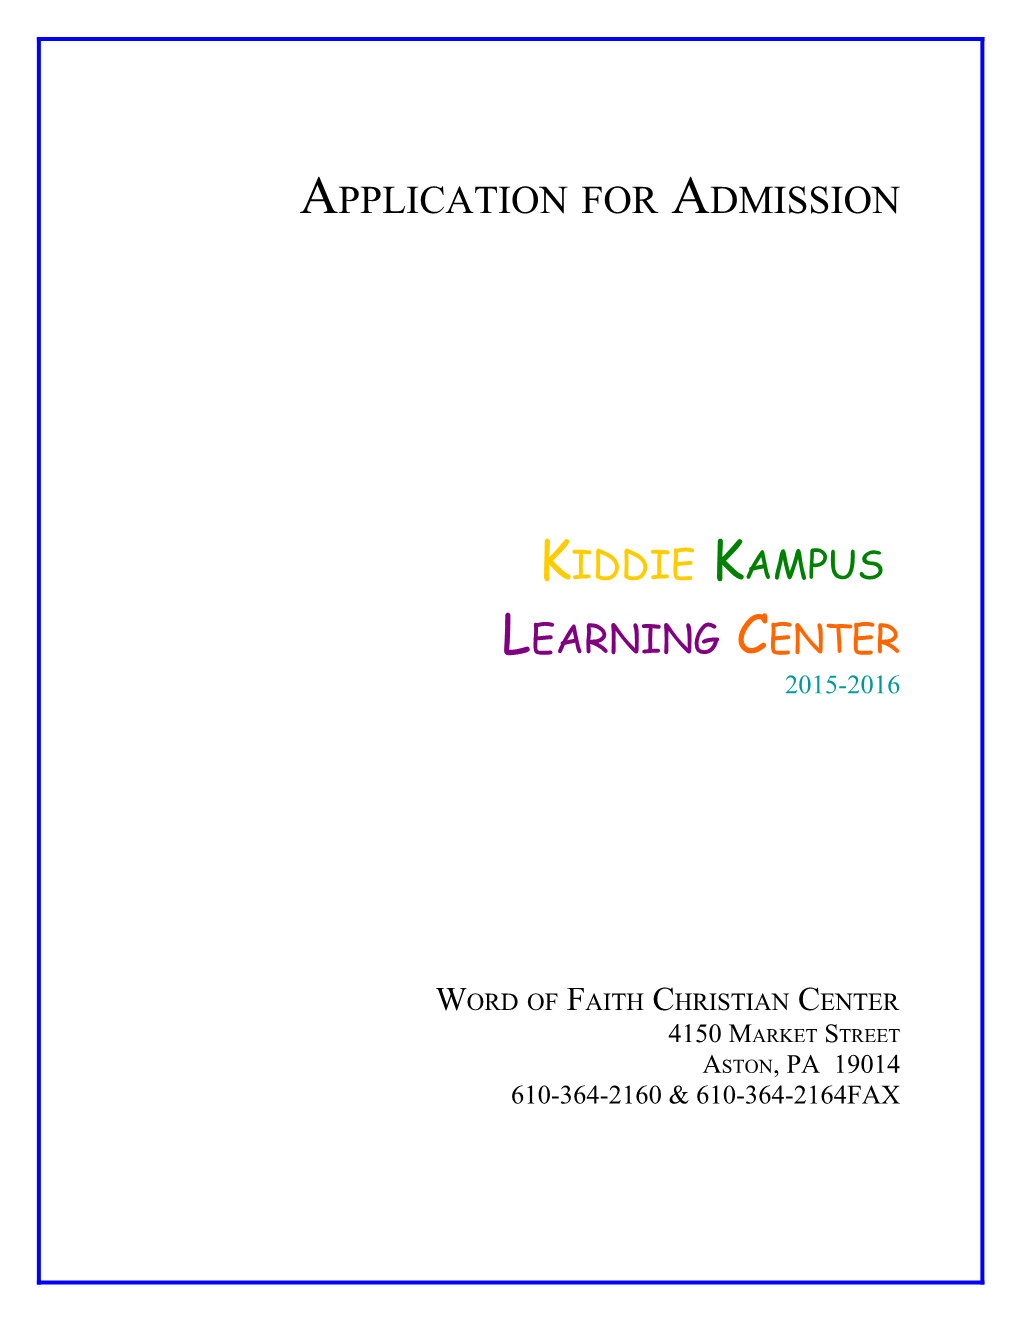 Application for Admission s10